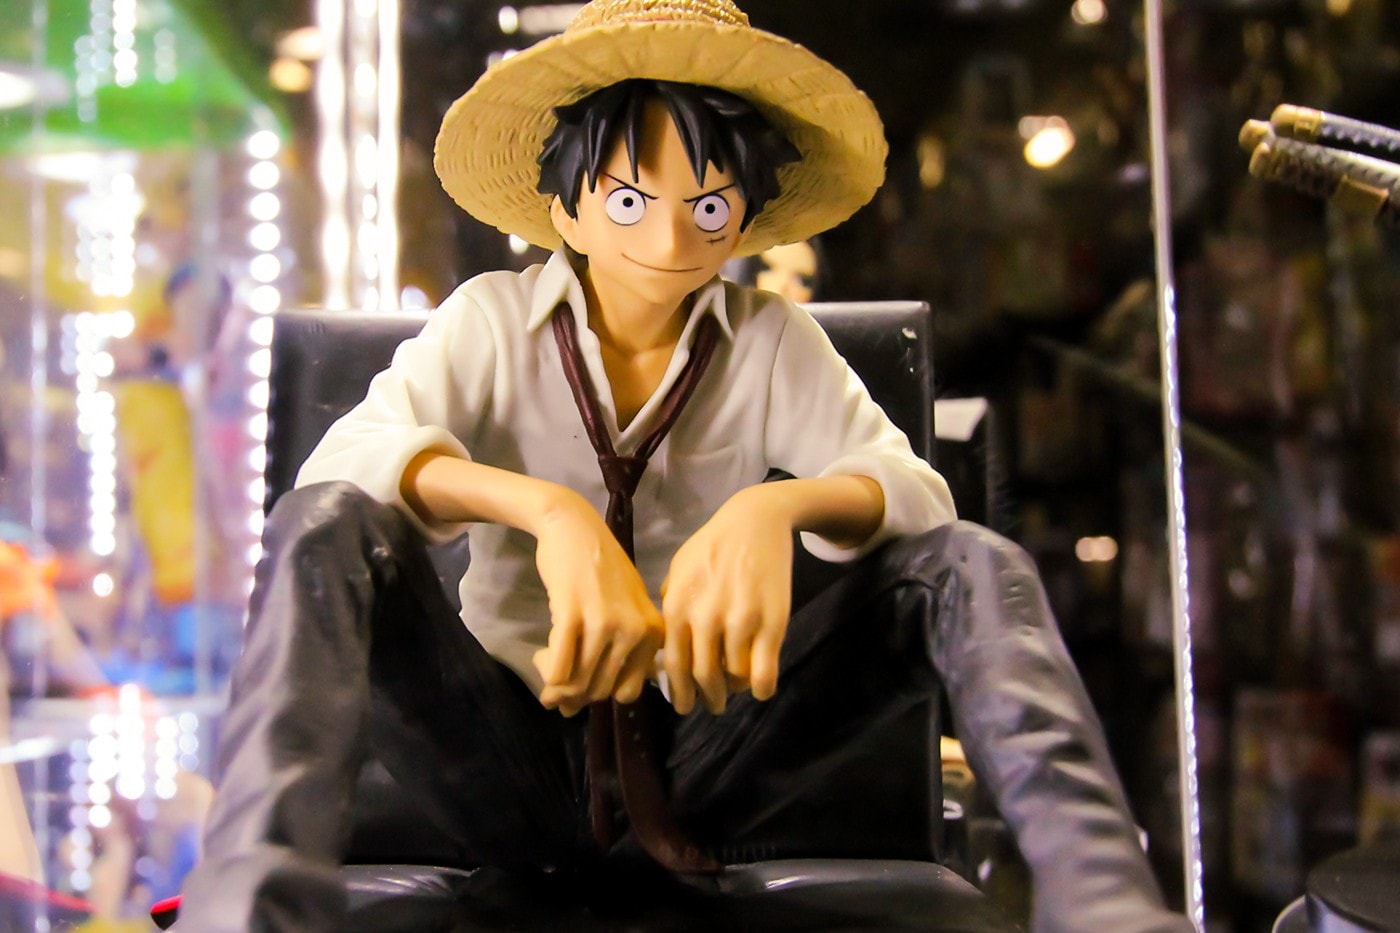 Greg on X: One Piece live-action update! Thanks to editors Sugita